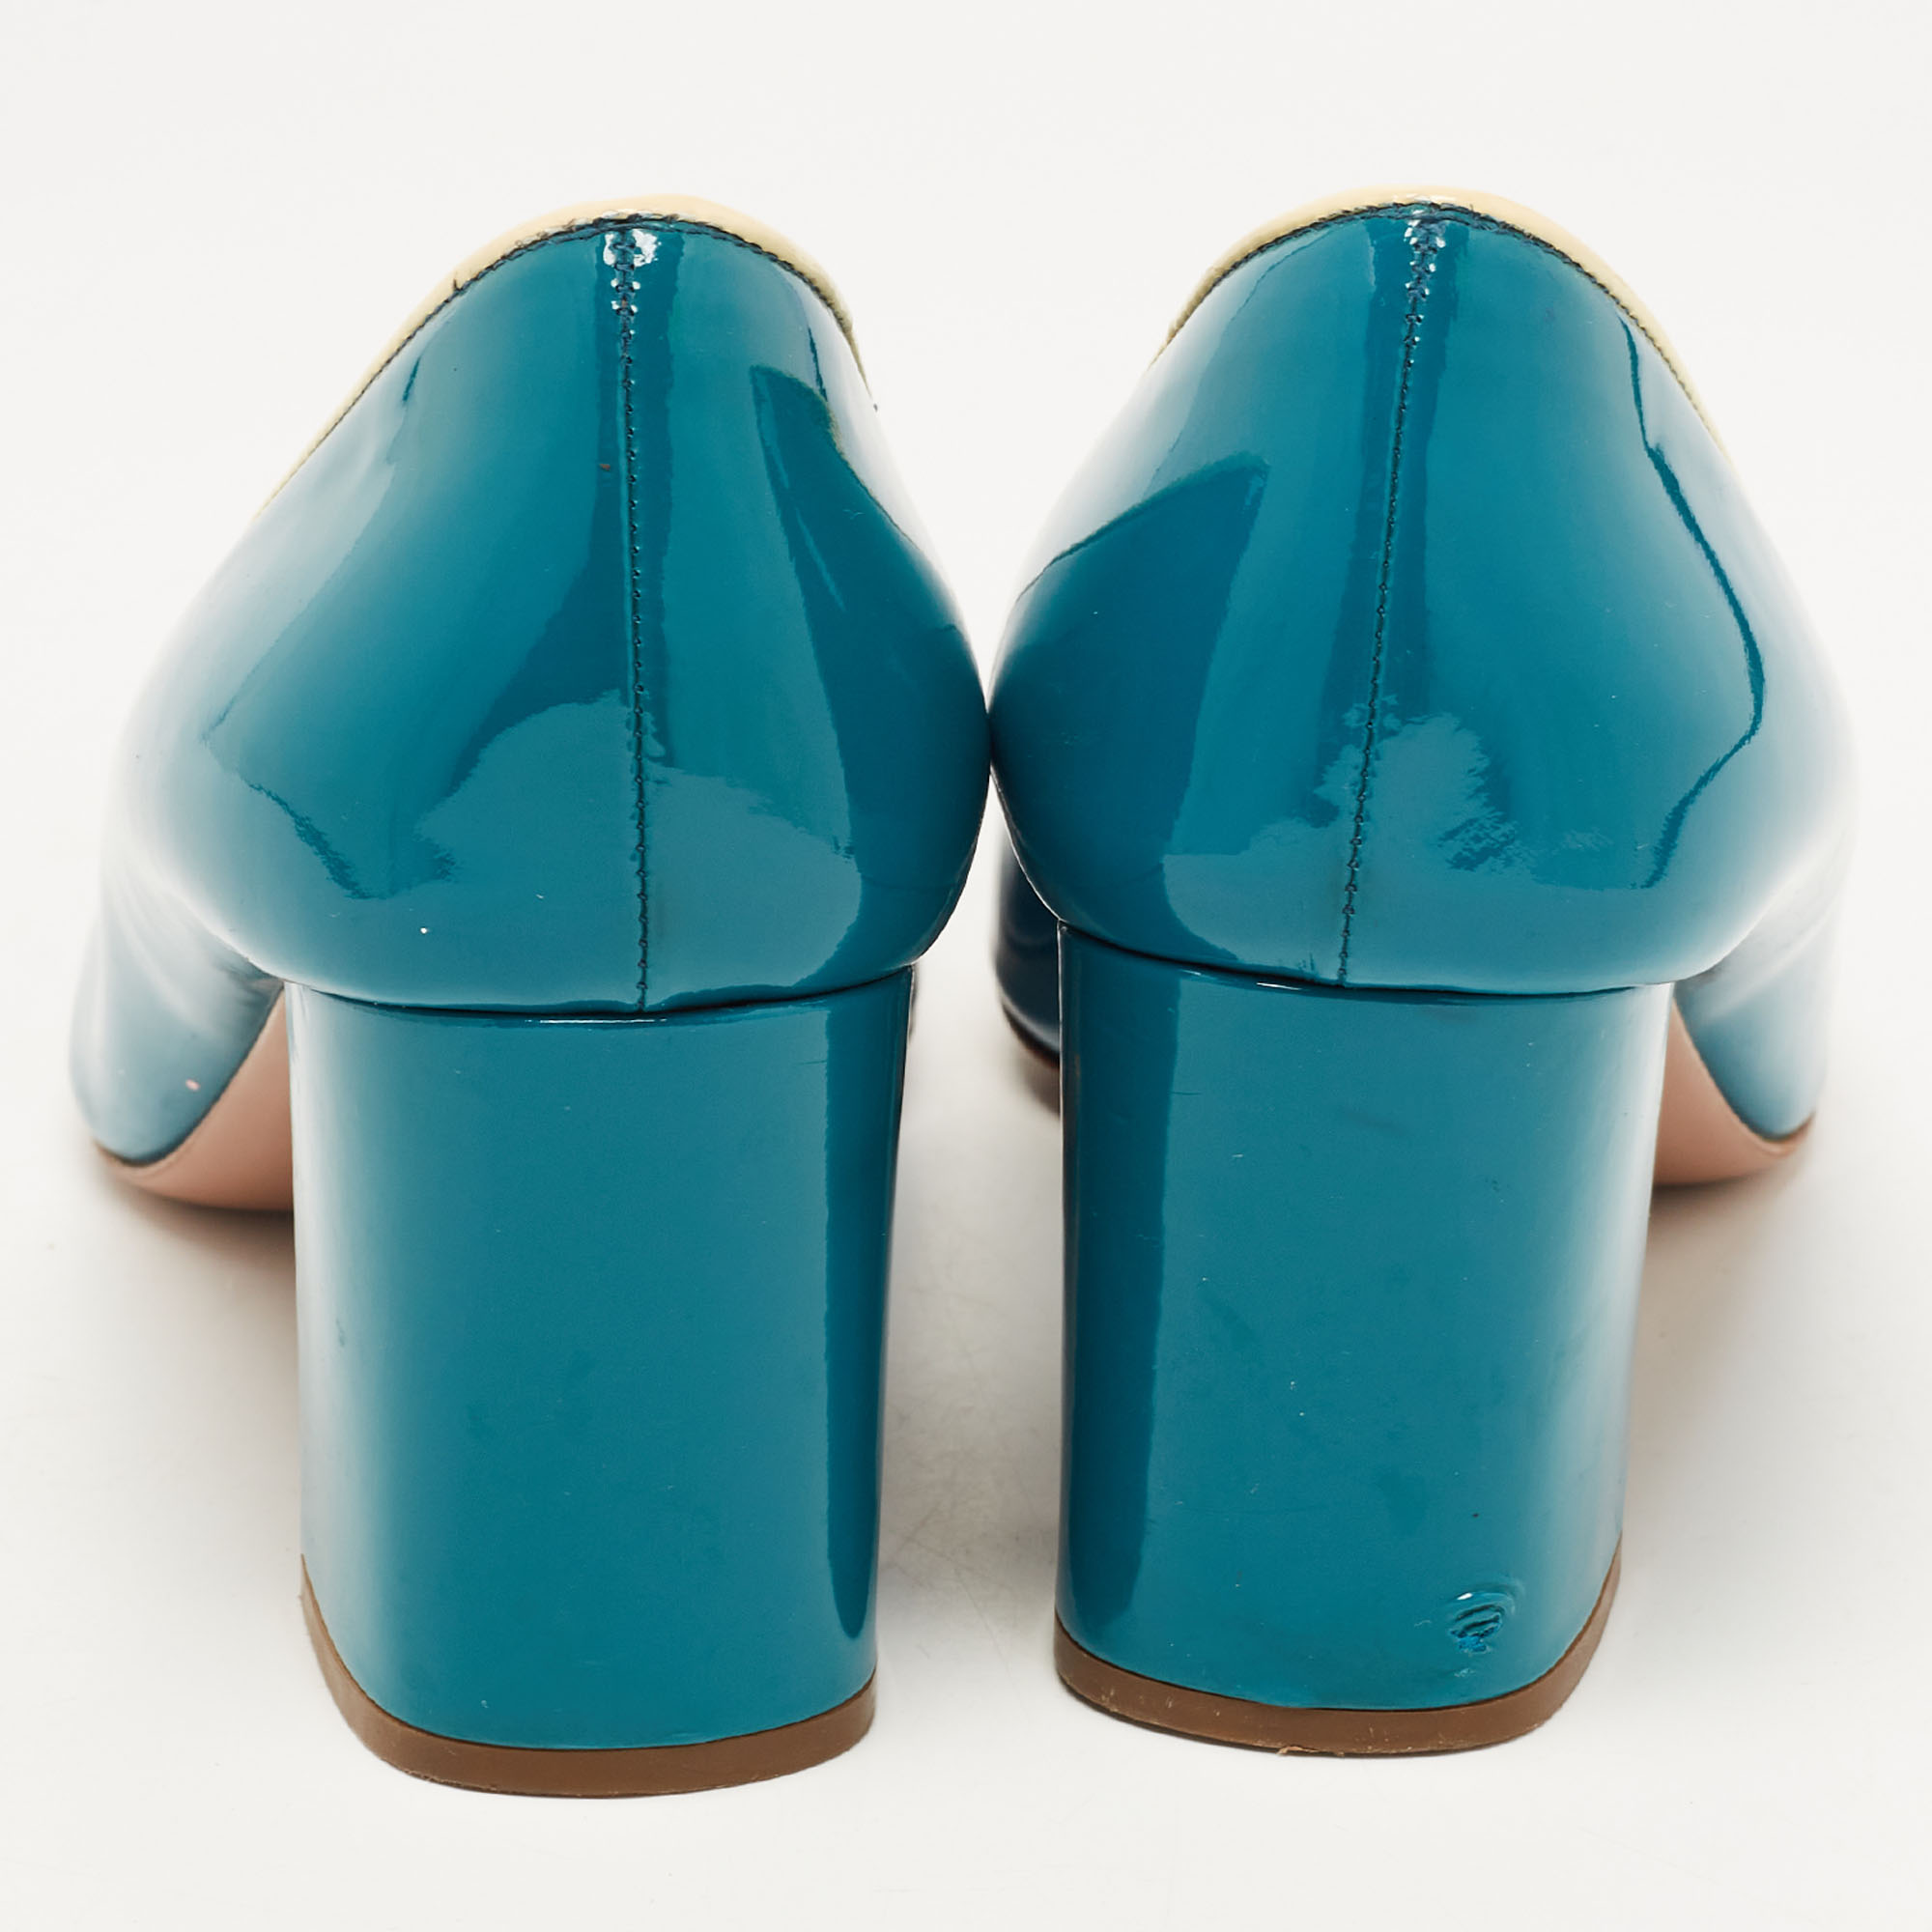 Prada Teal Patent Leather Loafer Pumps Size 35.5